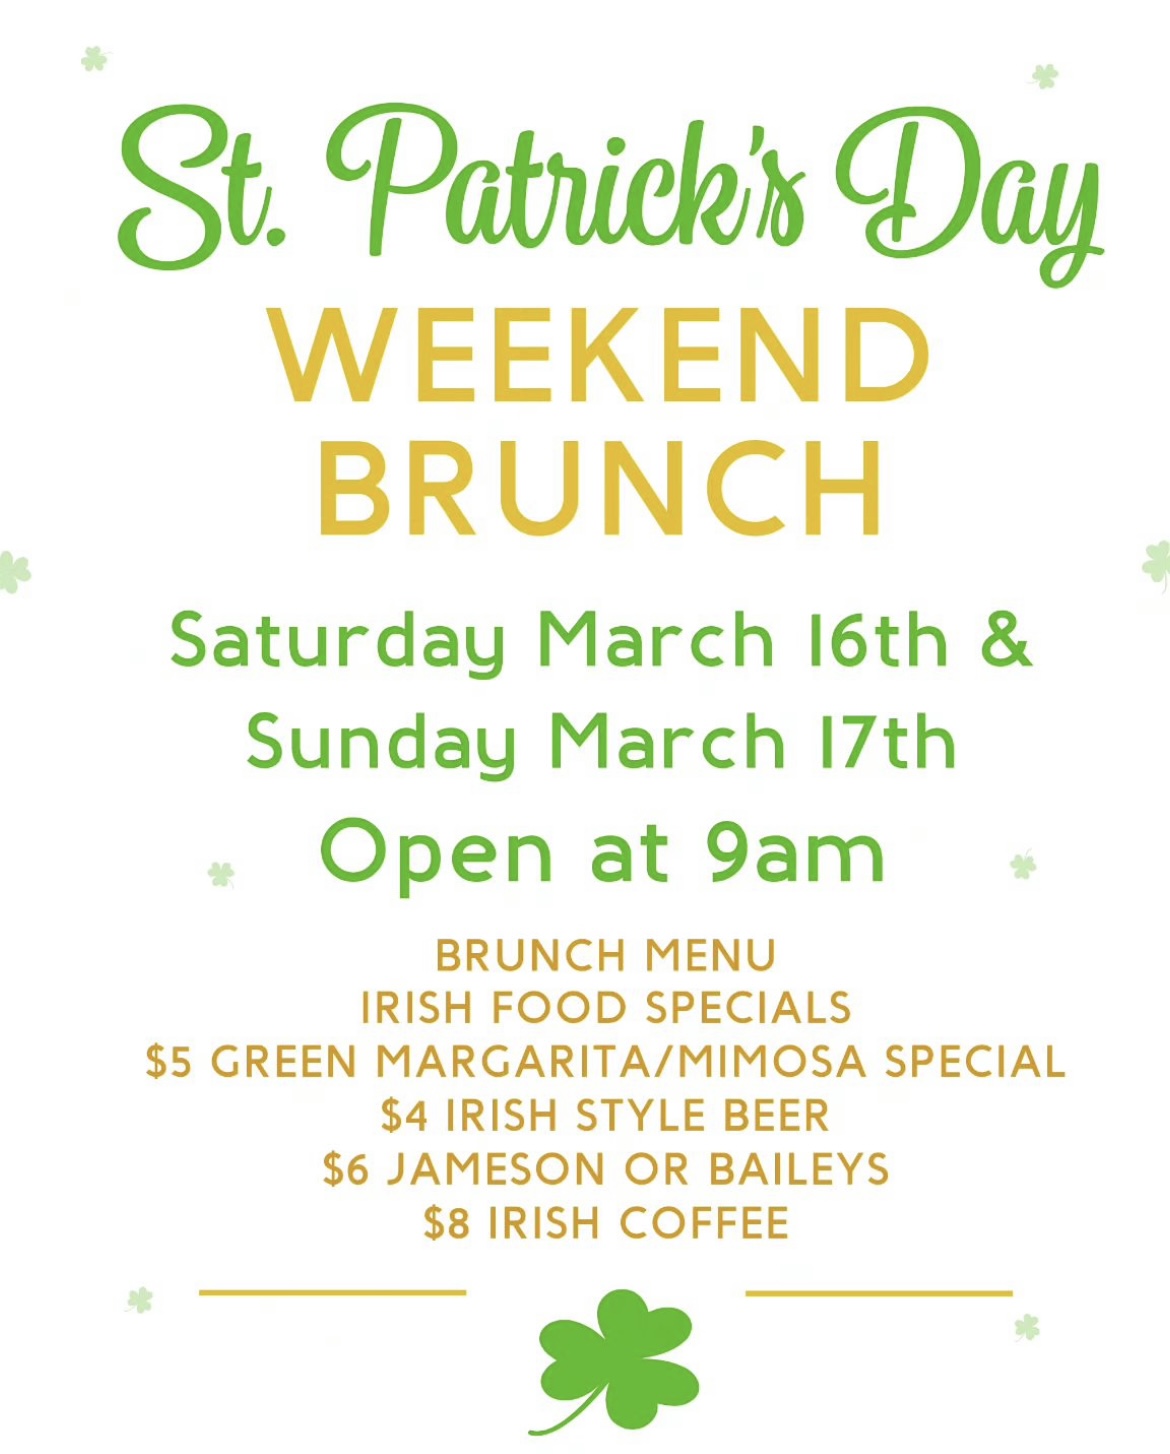 A graphic describing Sidelines Bar and Grill's St. Patrick's Day weekend brunch on Saturday, March 16th and Sunday, March 17th starting at 9am each day. They'll be serving Irish food specials, green margaritas and mimosas, Irish beers, Jameson and Baileys, and Irish coffee.